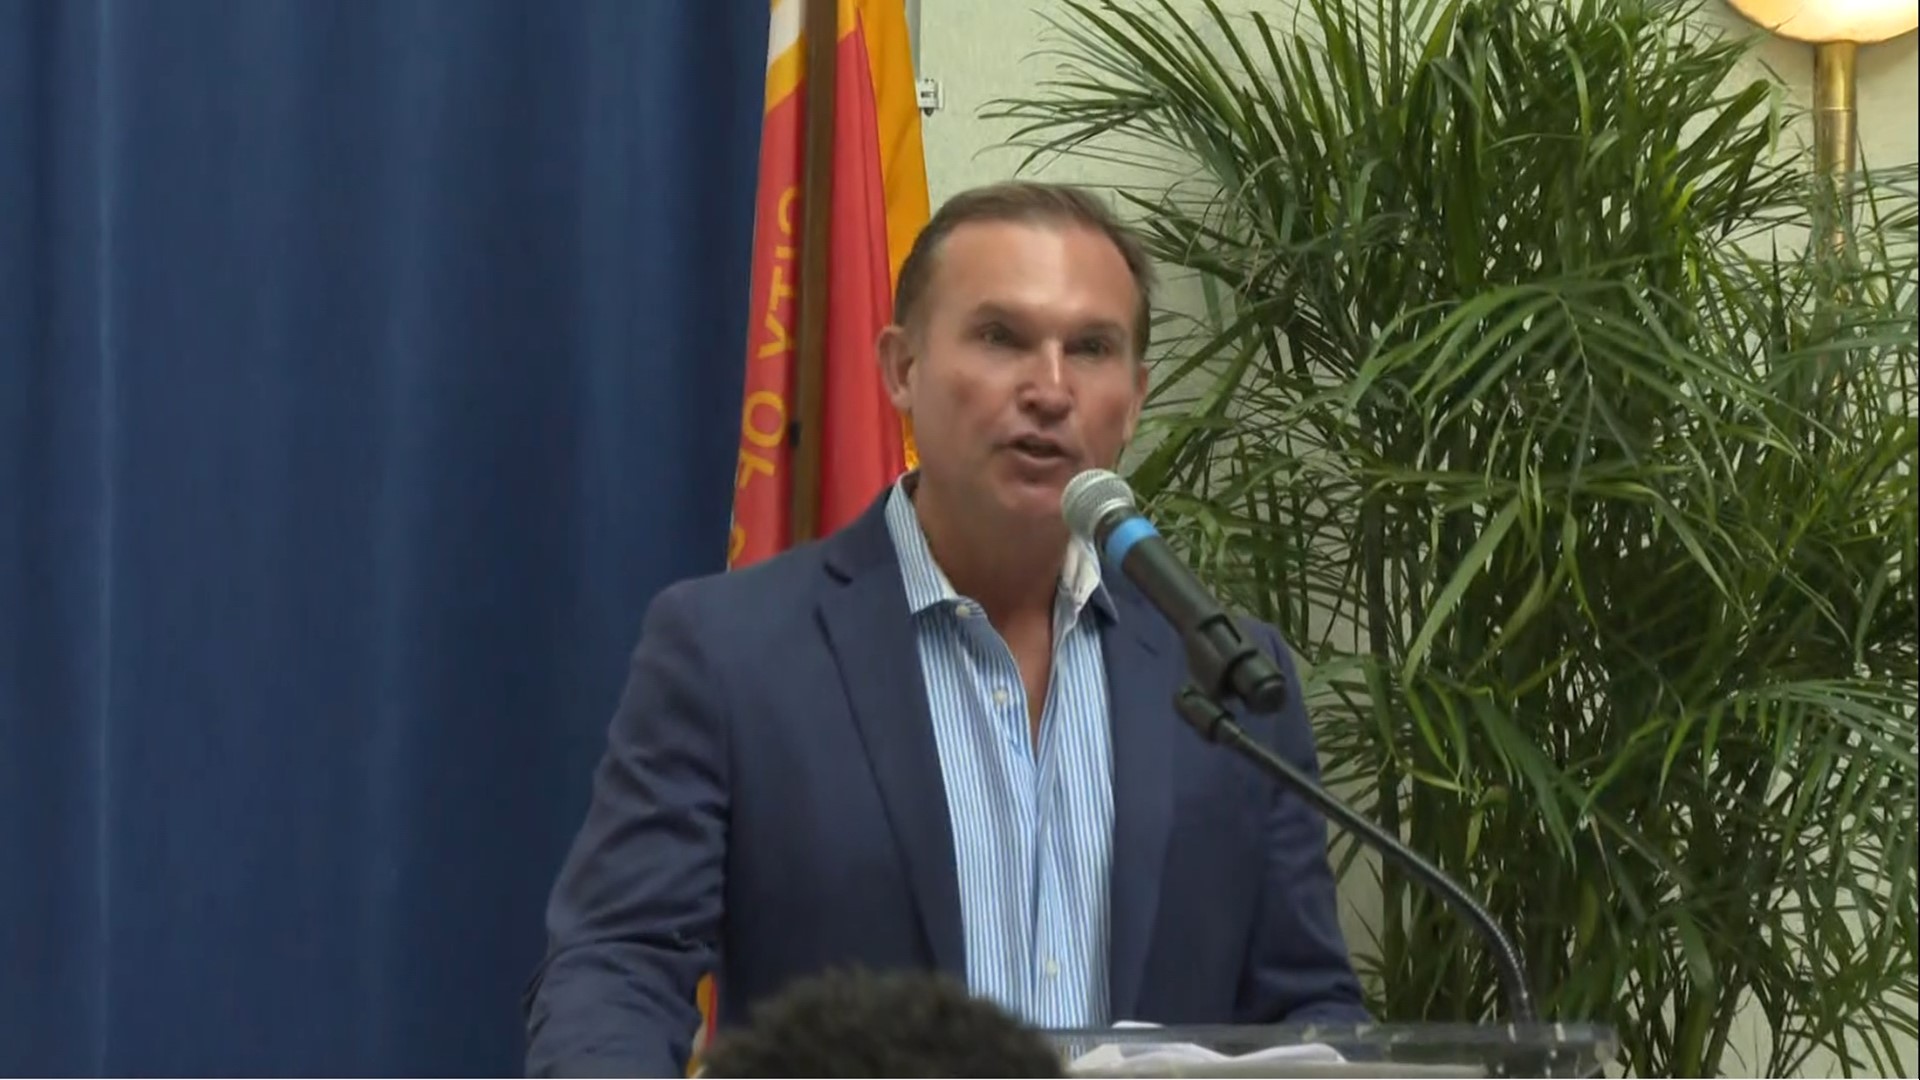 Jeannie Blaylock sat down with outgoing Jacksonville Mayor Lenny Curry to talk about his two terms in office, his accomplishments, challenges, and his future.